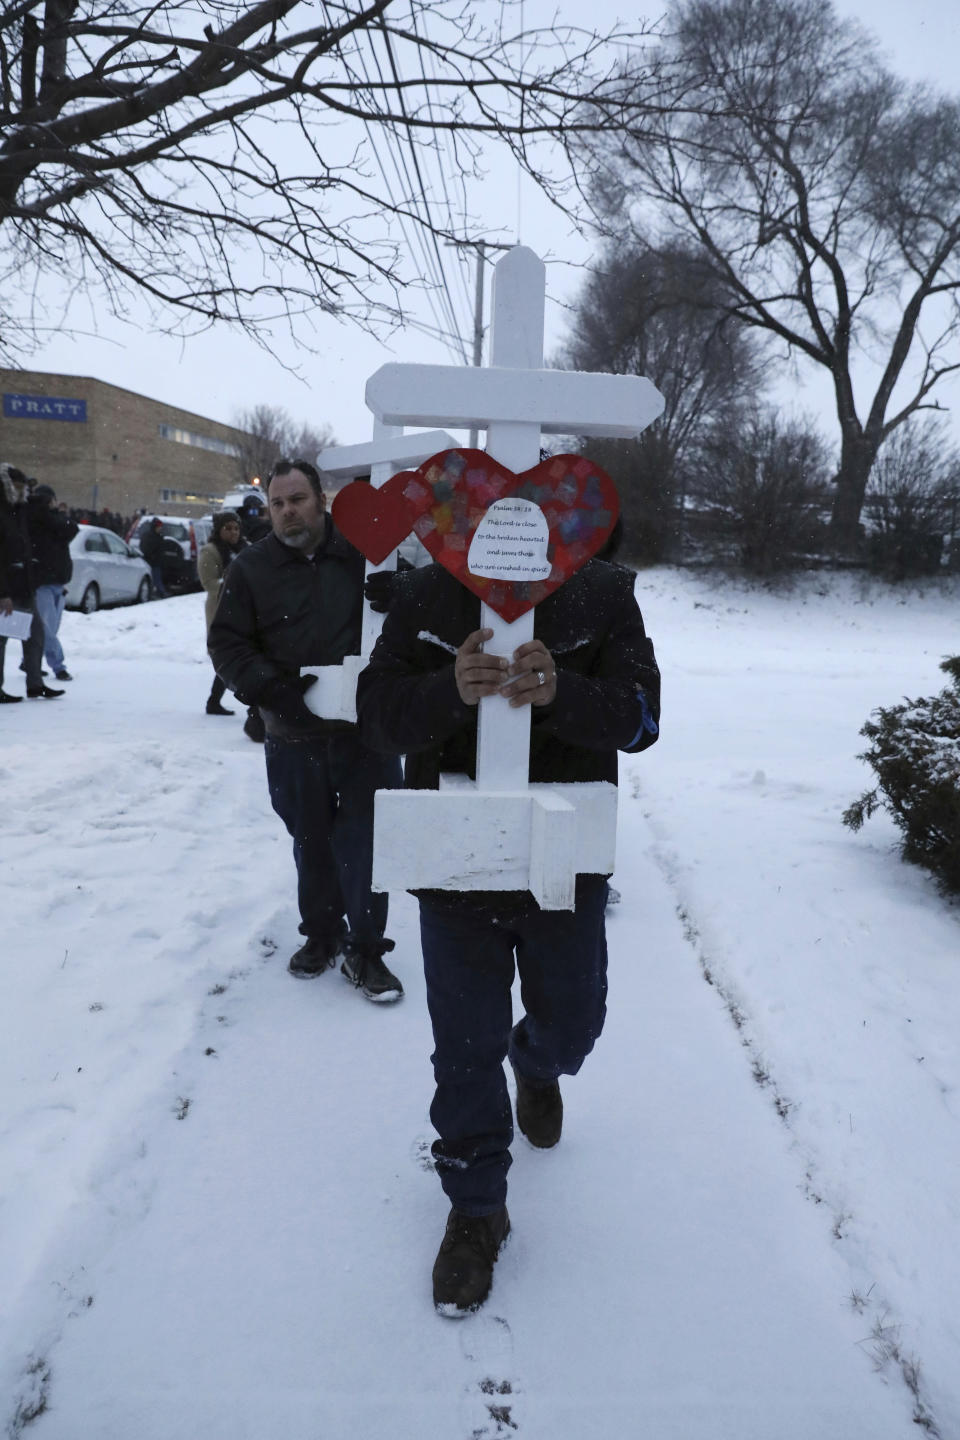 Casildo Cuevas holds a victim's cross as he walks to the Aurora police station after a makeshift memorial Sunday, Feb. 17, 2019, in Aurora, Ill., near Henry Pratt Co. manufacturing company where several were killed on Friday. Authorities say an initial background check five years ago failed to flag an out-of-state felony conviction that would have prevented a man from buying the gun he used in the mass shooting in Aurora. (AP Photo/Nam Y. Huh)